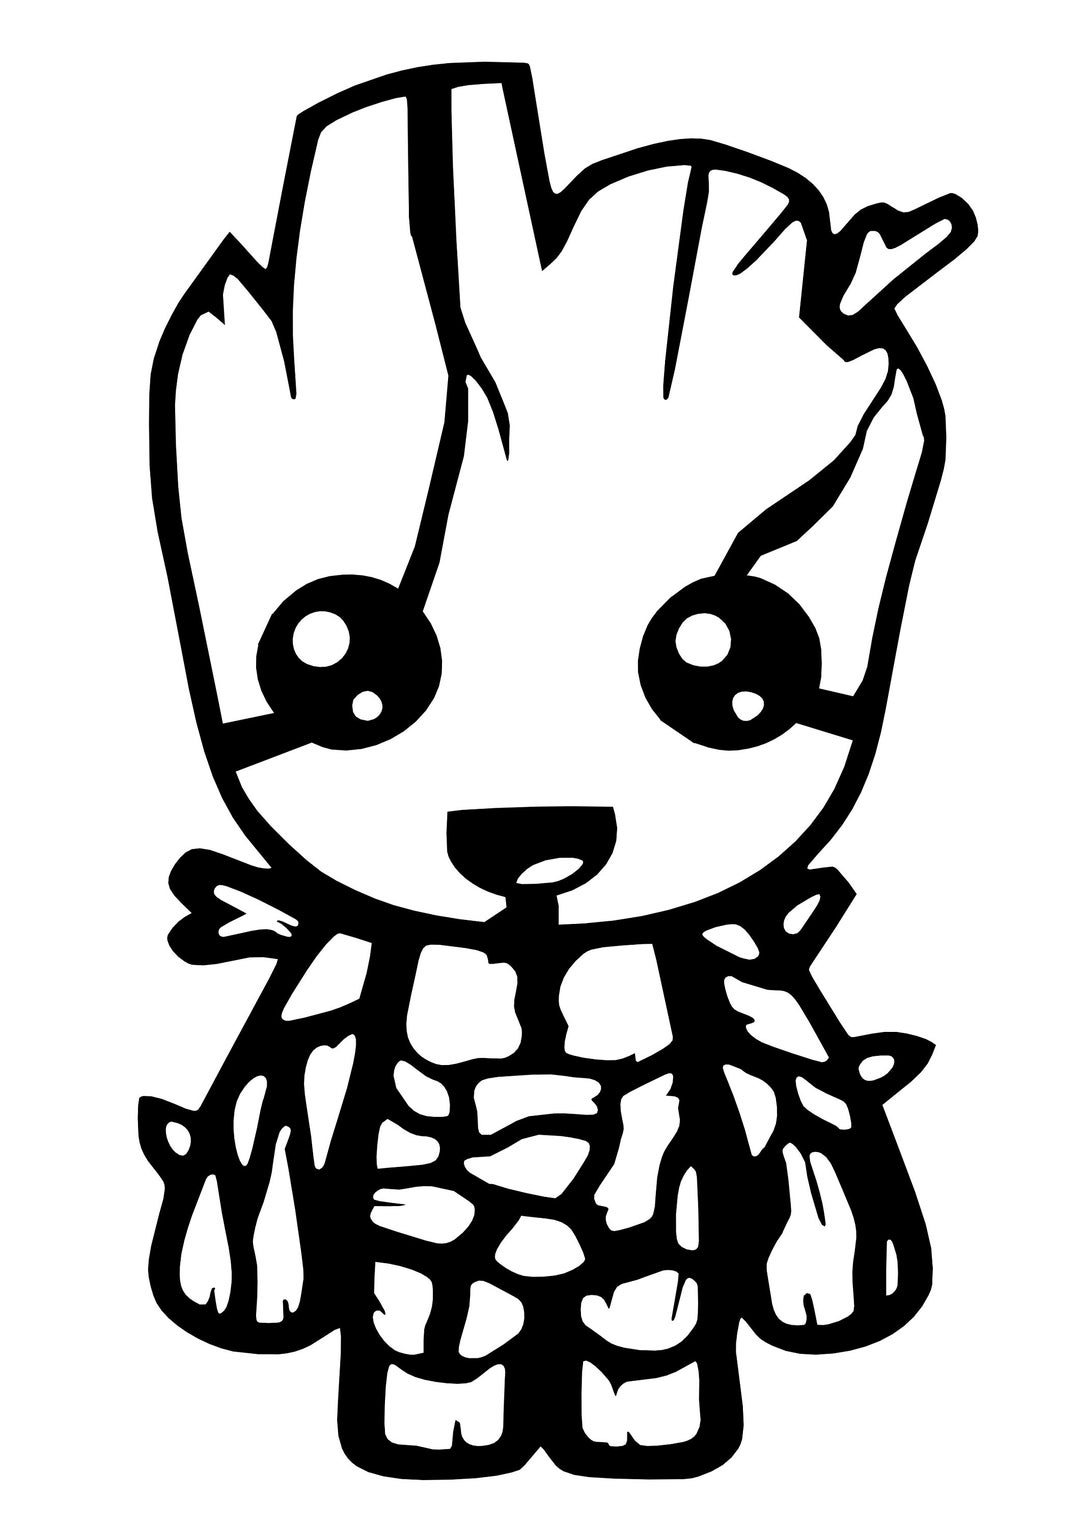 Baby Groot Inspired CNC Cutting File DXF Dwg Svg Jpg Digital Files - Etsy